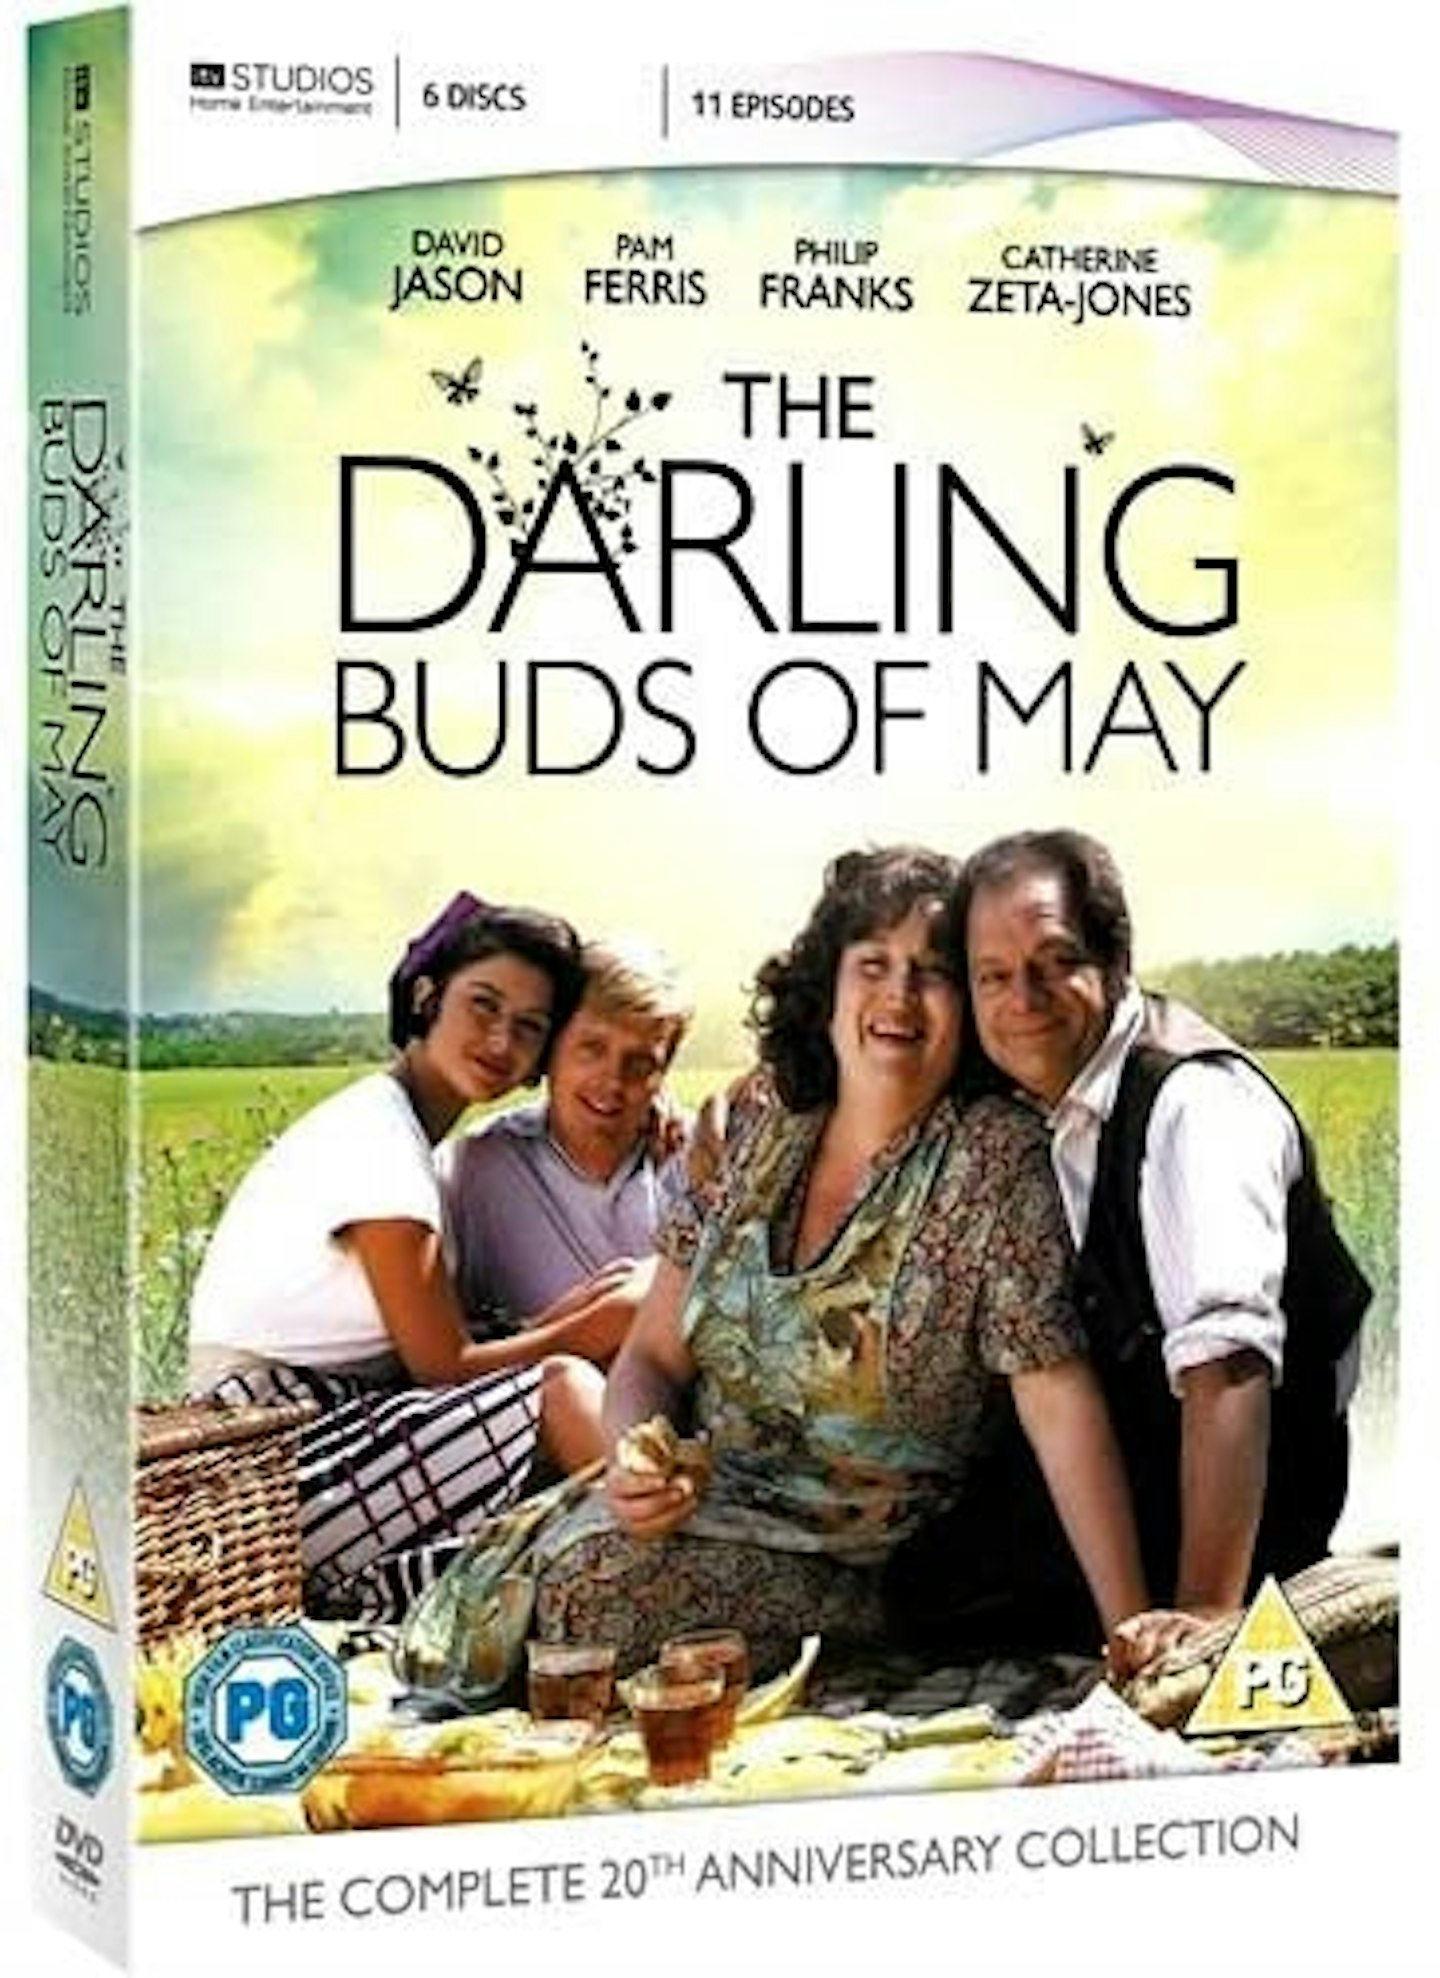 The Darling Buds of May Complete ITV TV Series DVD Collection